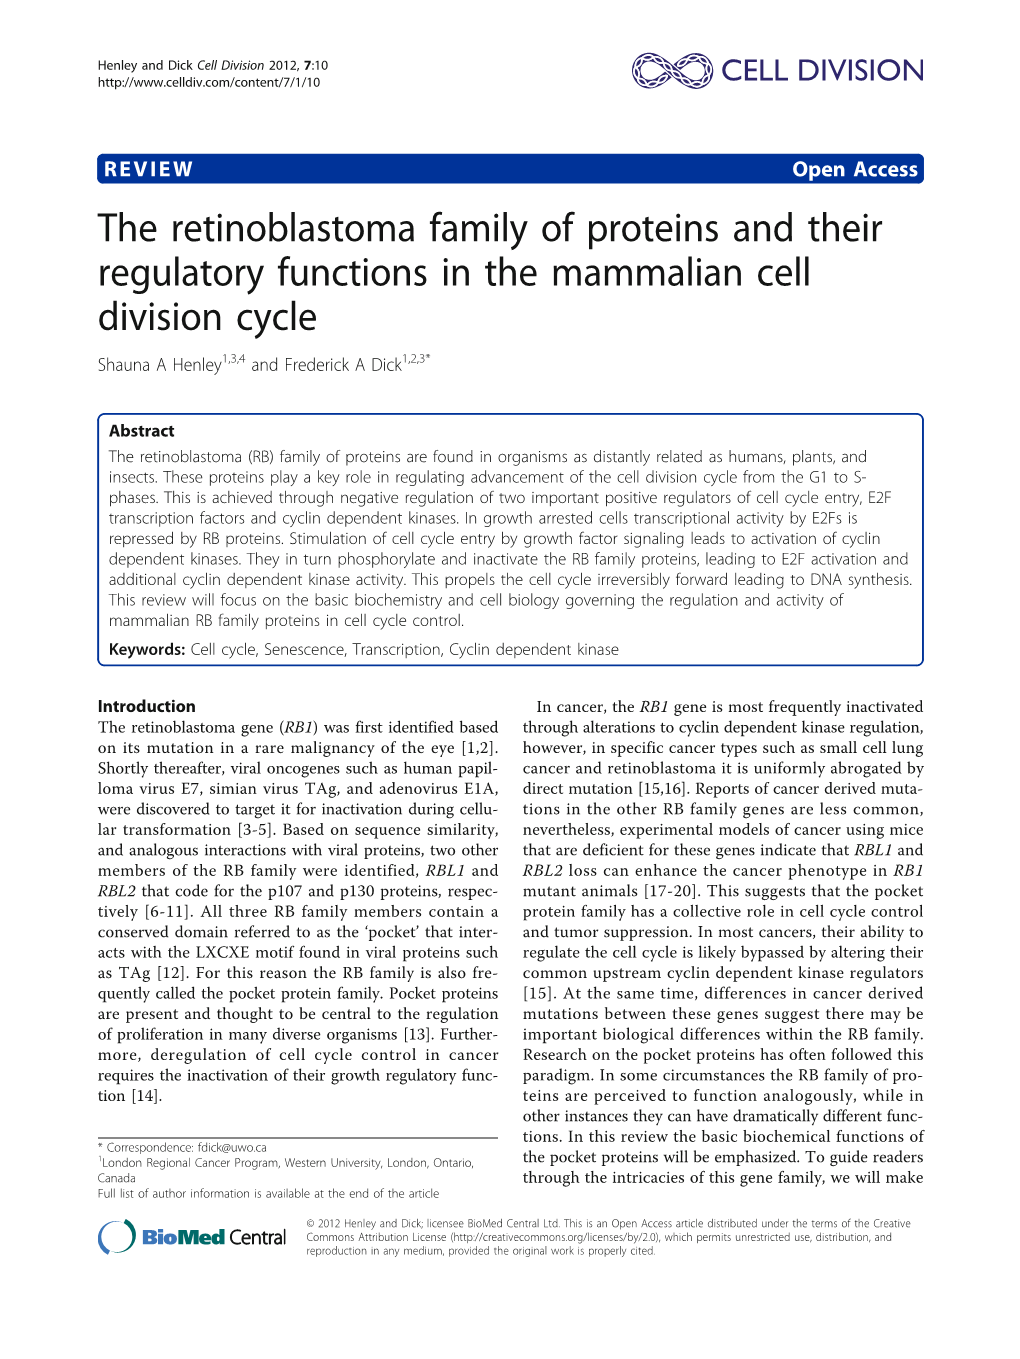 The Retinoblastoma Family of Proteins and Their Regulatory Functions in the Mammalian Cell Division Cycle Shauna a Henley1,3,4 and Frederick a Dick1,2,3*